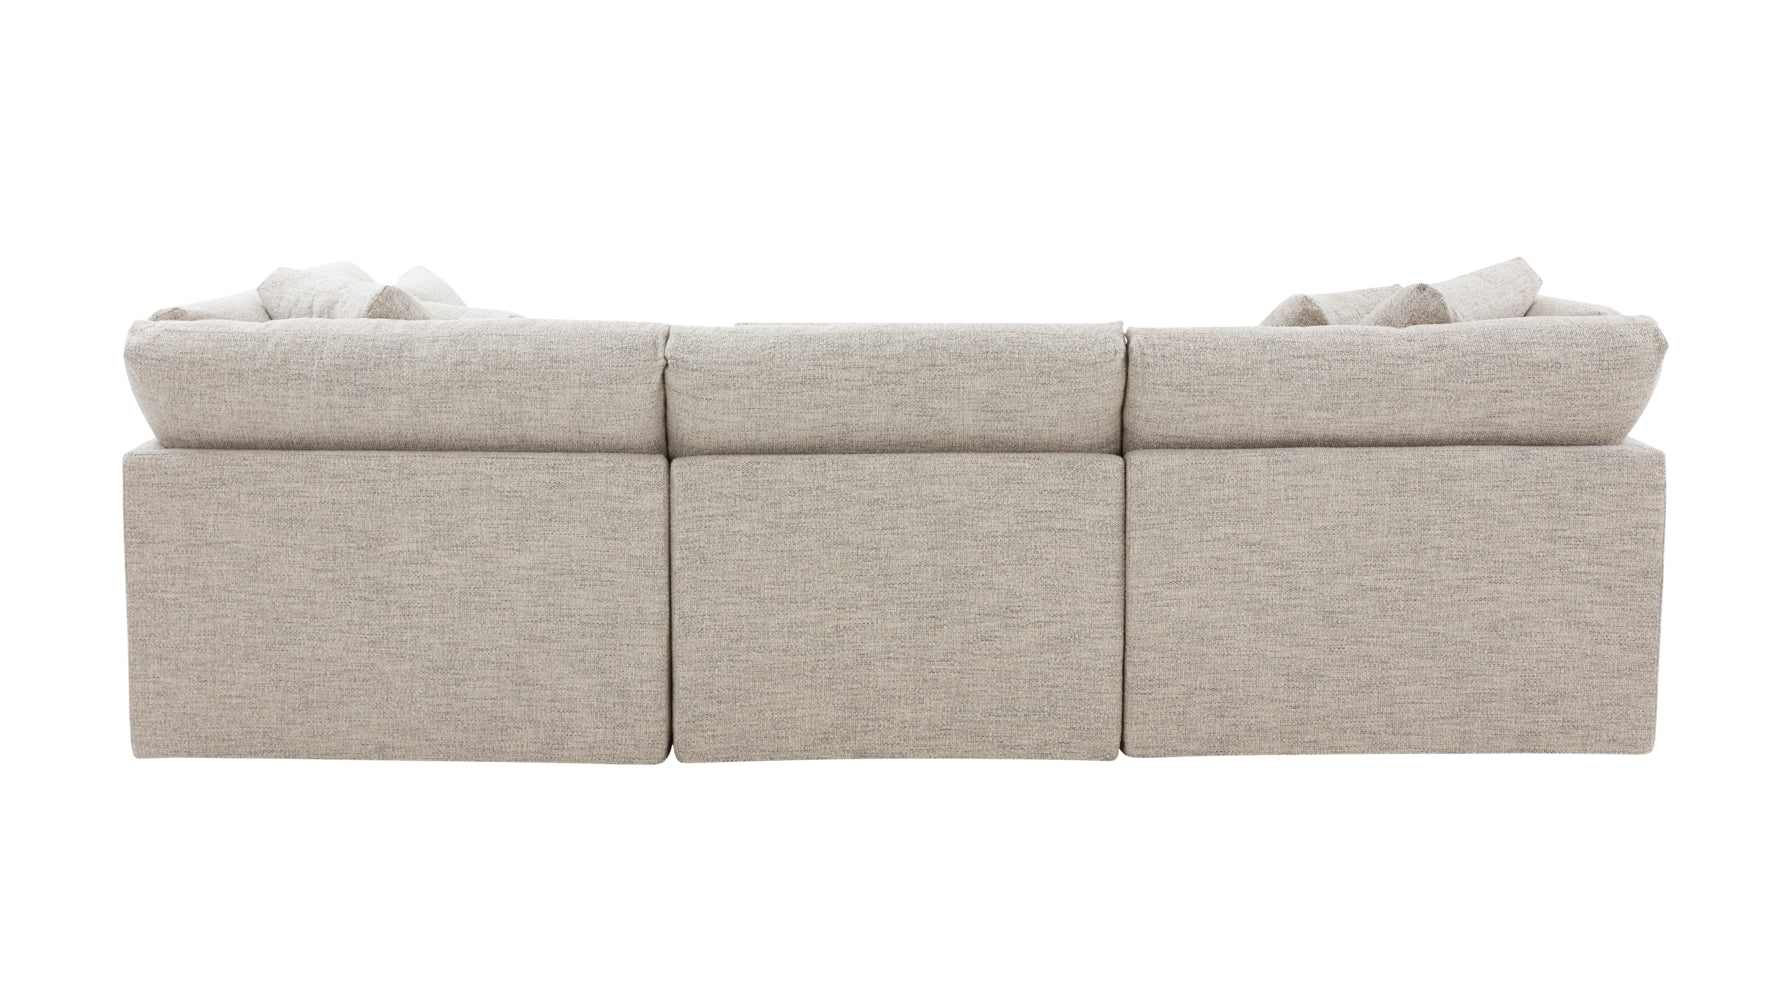 Get Together™ 5-Piece Modular Sectional, Large, Oatmeal - Image 7